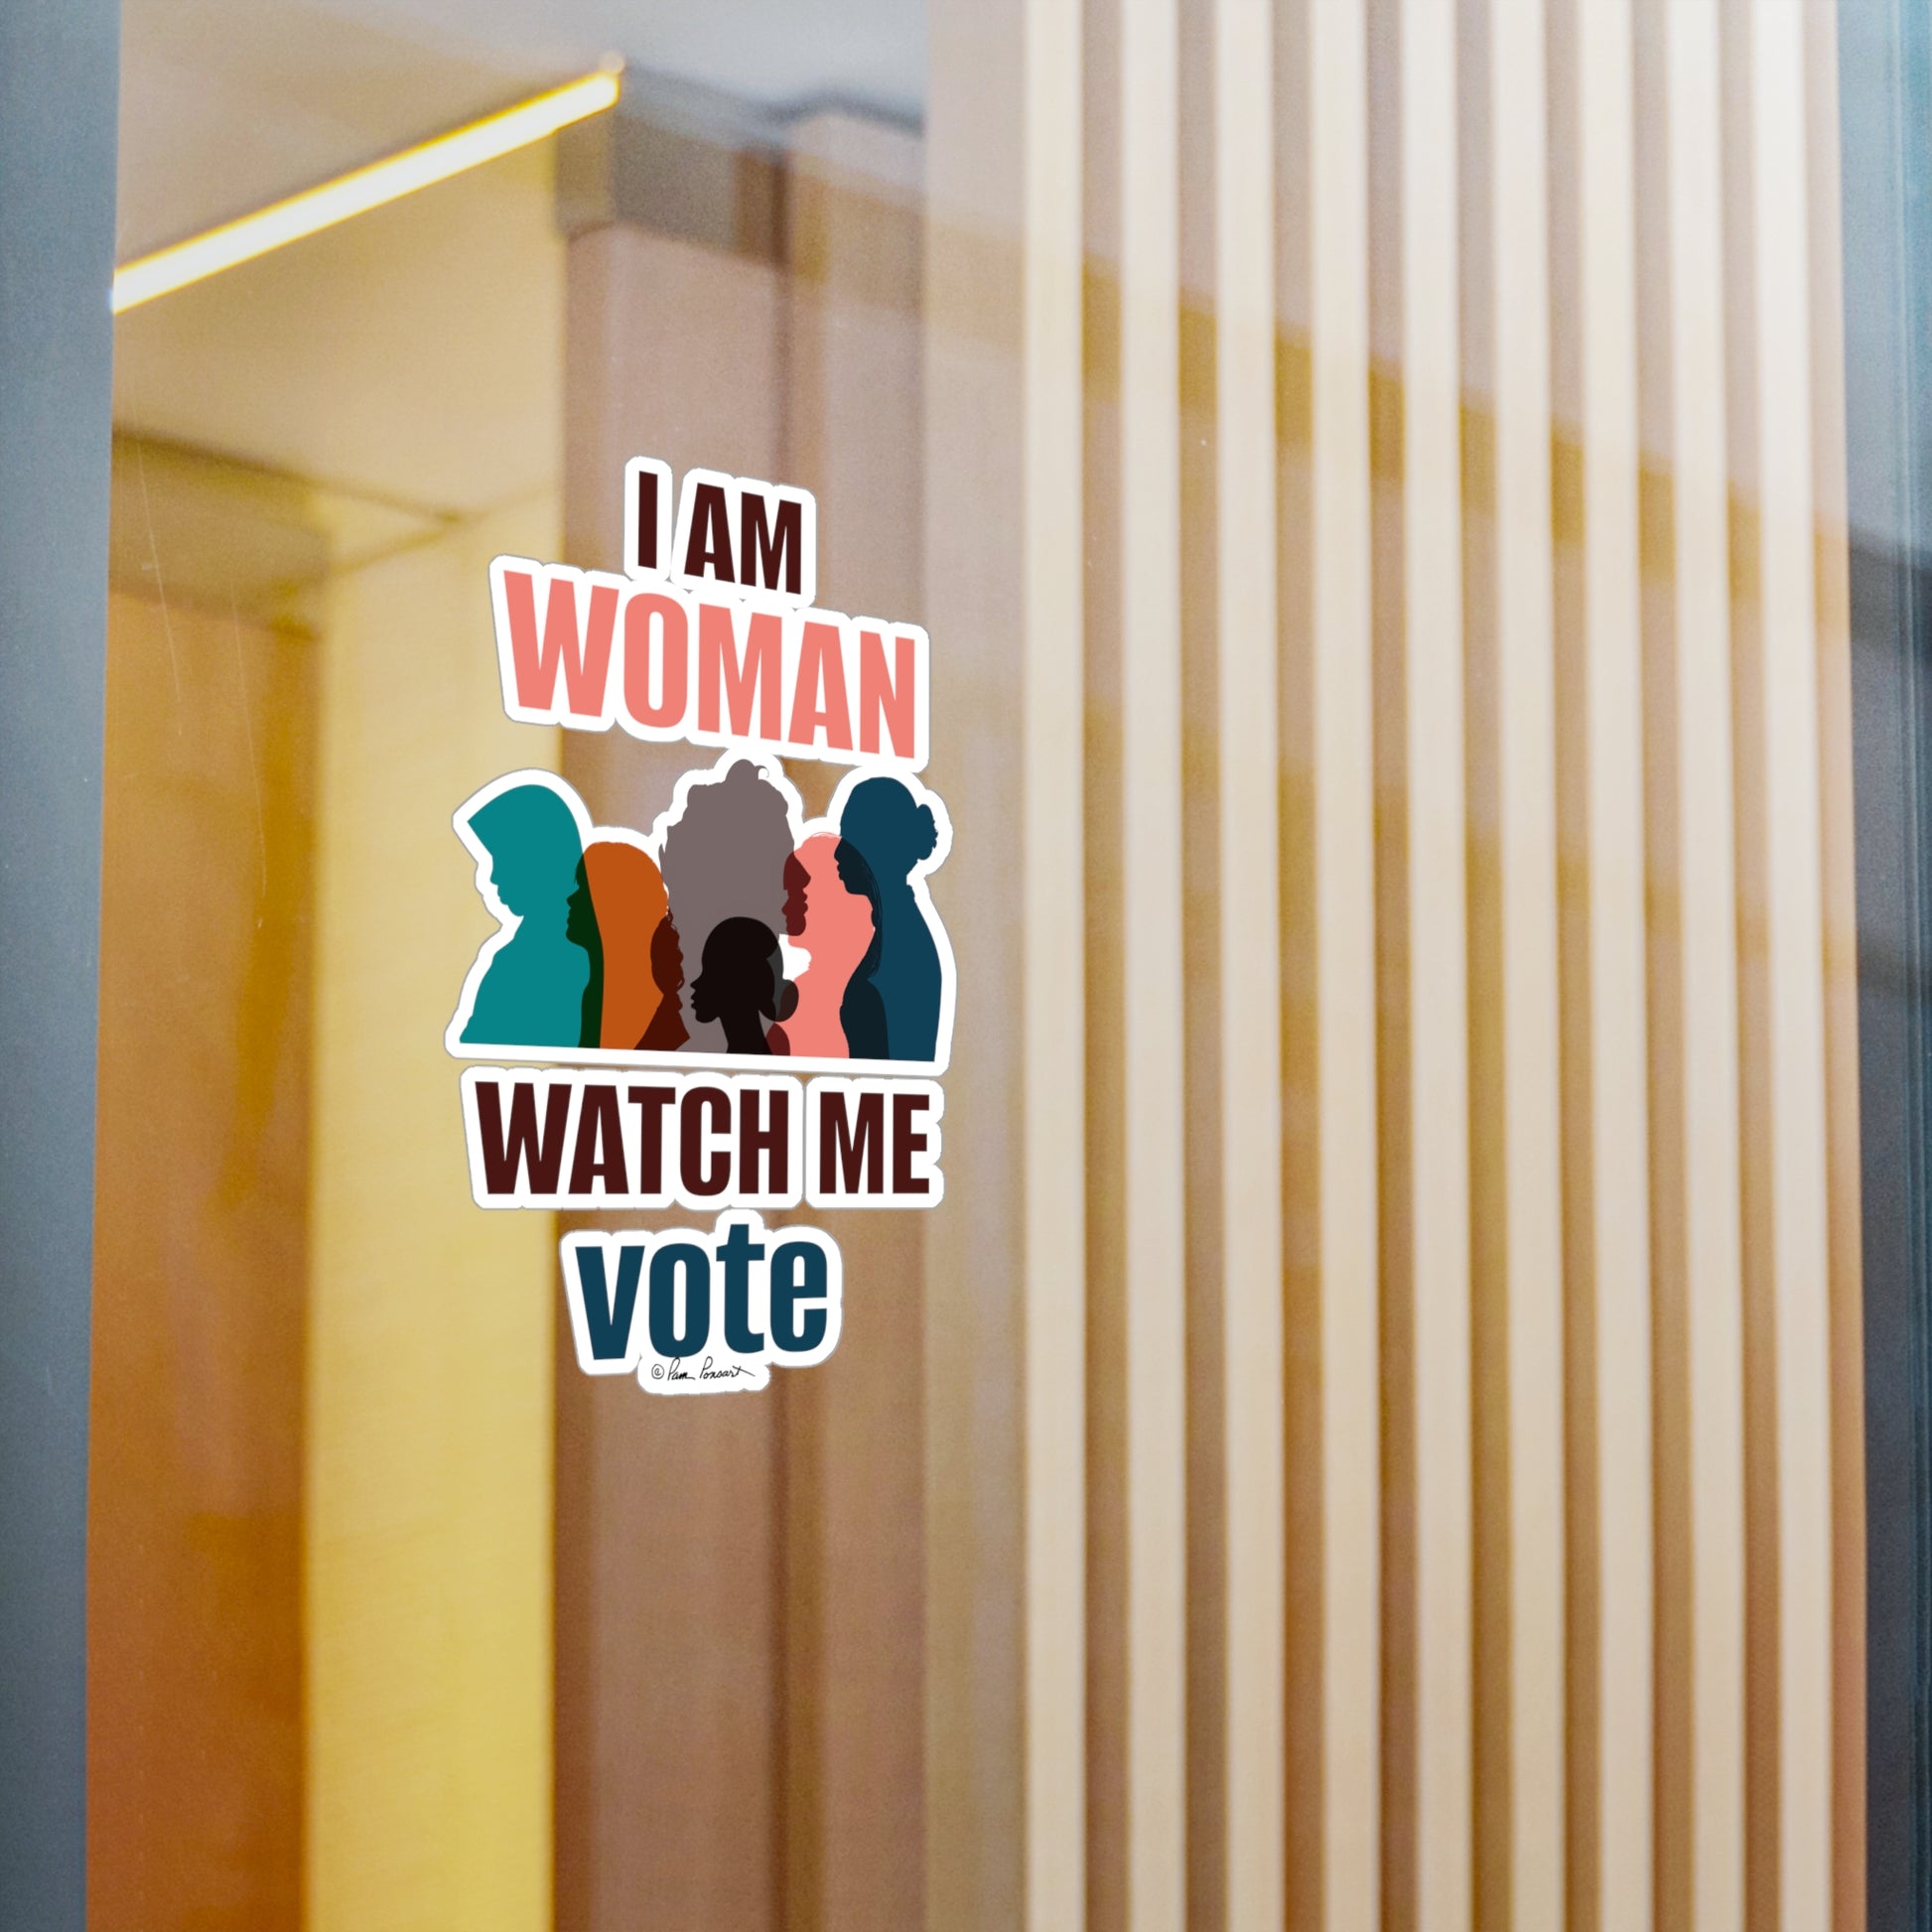 Sticker on a glass door reading "i am woman watch me vote" with silhouettes of three women, made from white vinyl, set against a blurred room background. Introducing the Voting Women's Decals by Printify: Unisex; 4 sizes; Vinyl; Graphics.